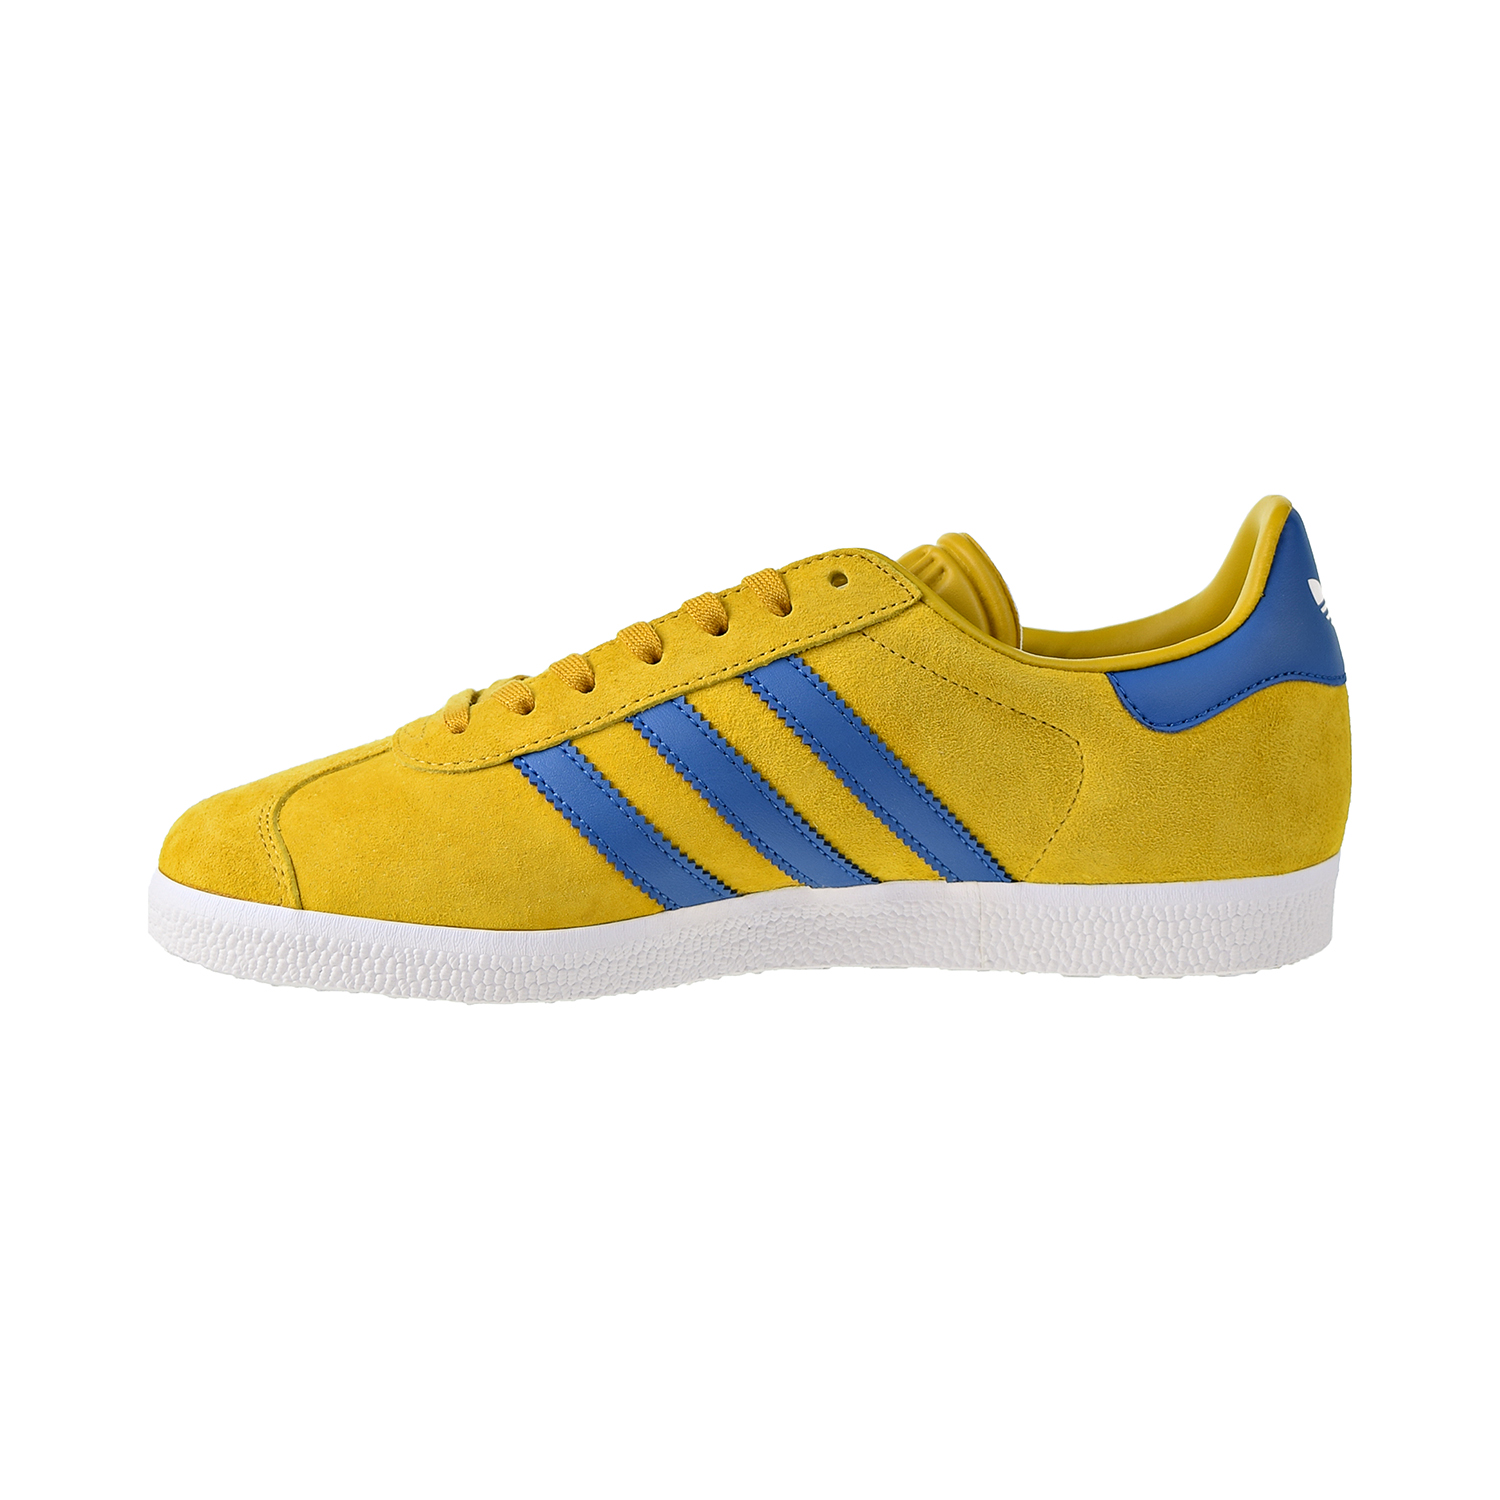 adidas gazelle mens blue and yellow